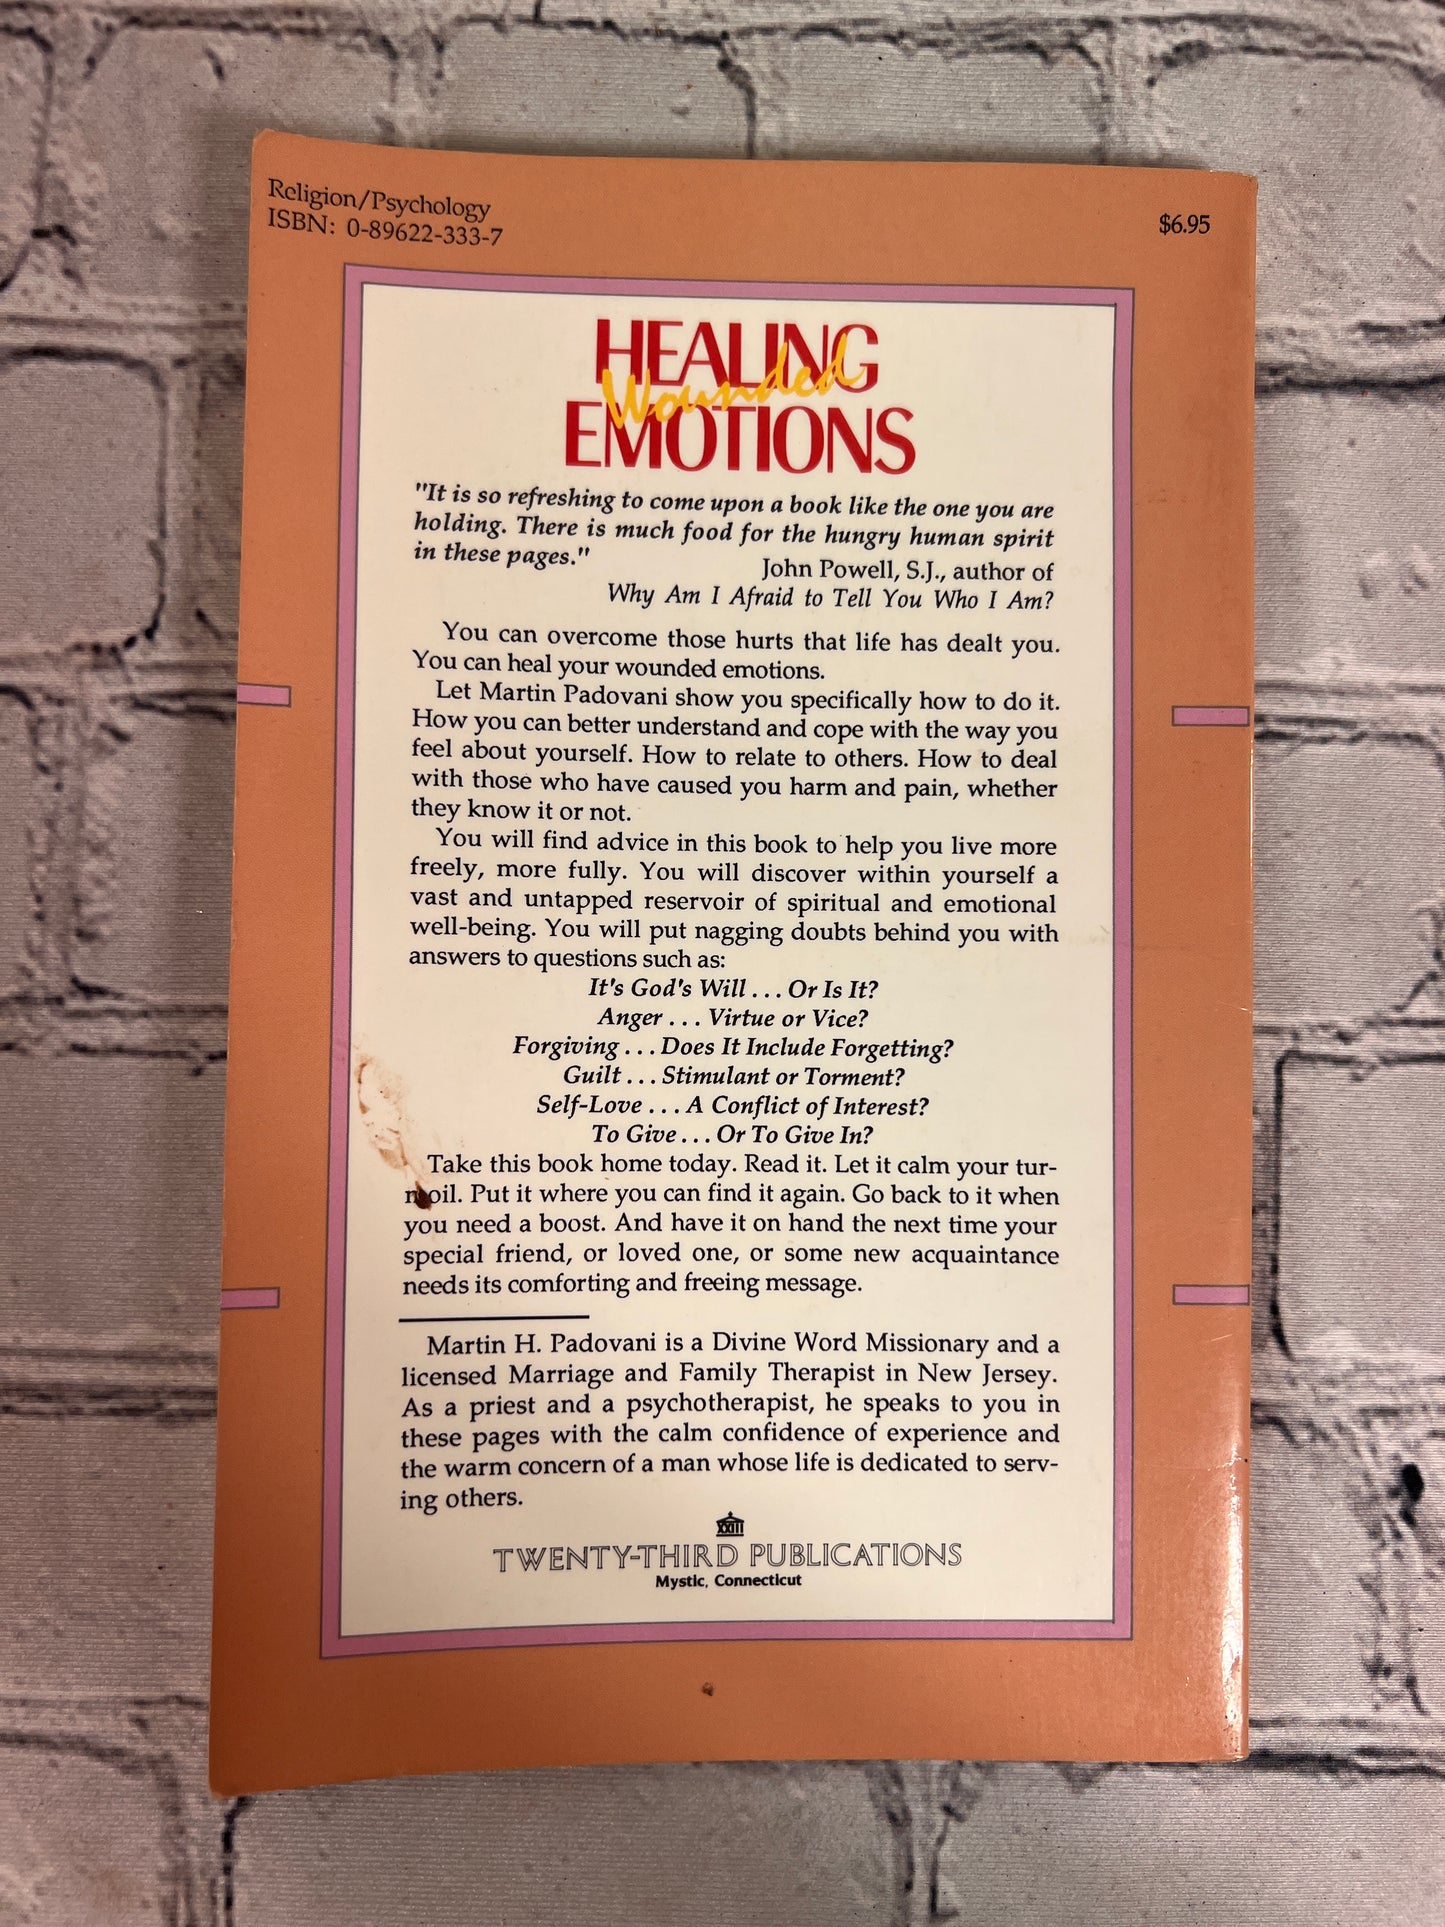 Healing Wounded Emotions Overcoming Life's Hurts by Martin H. Padovani [1993]